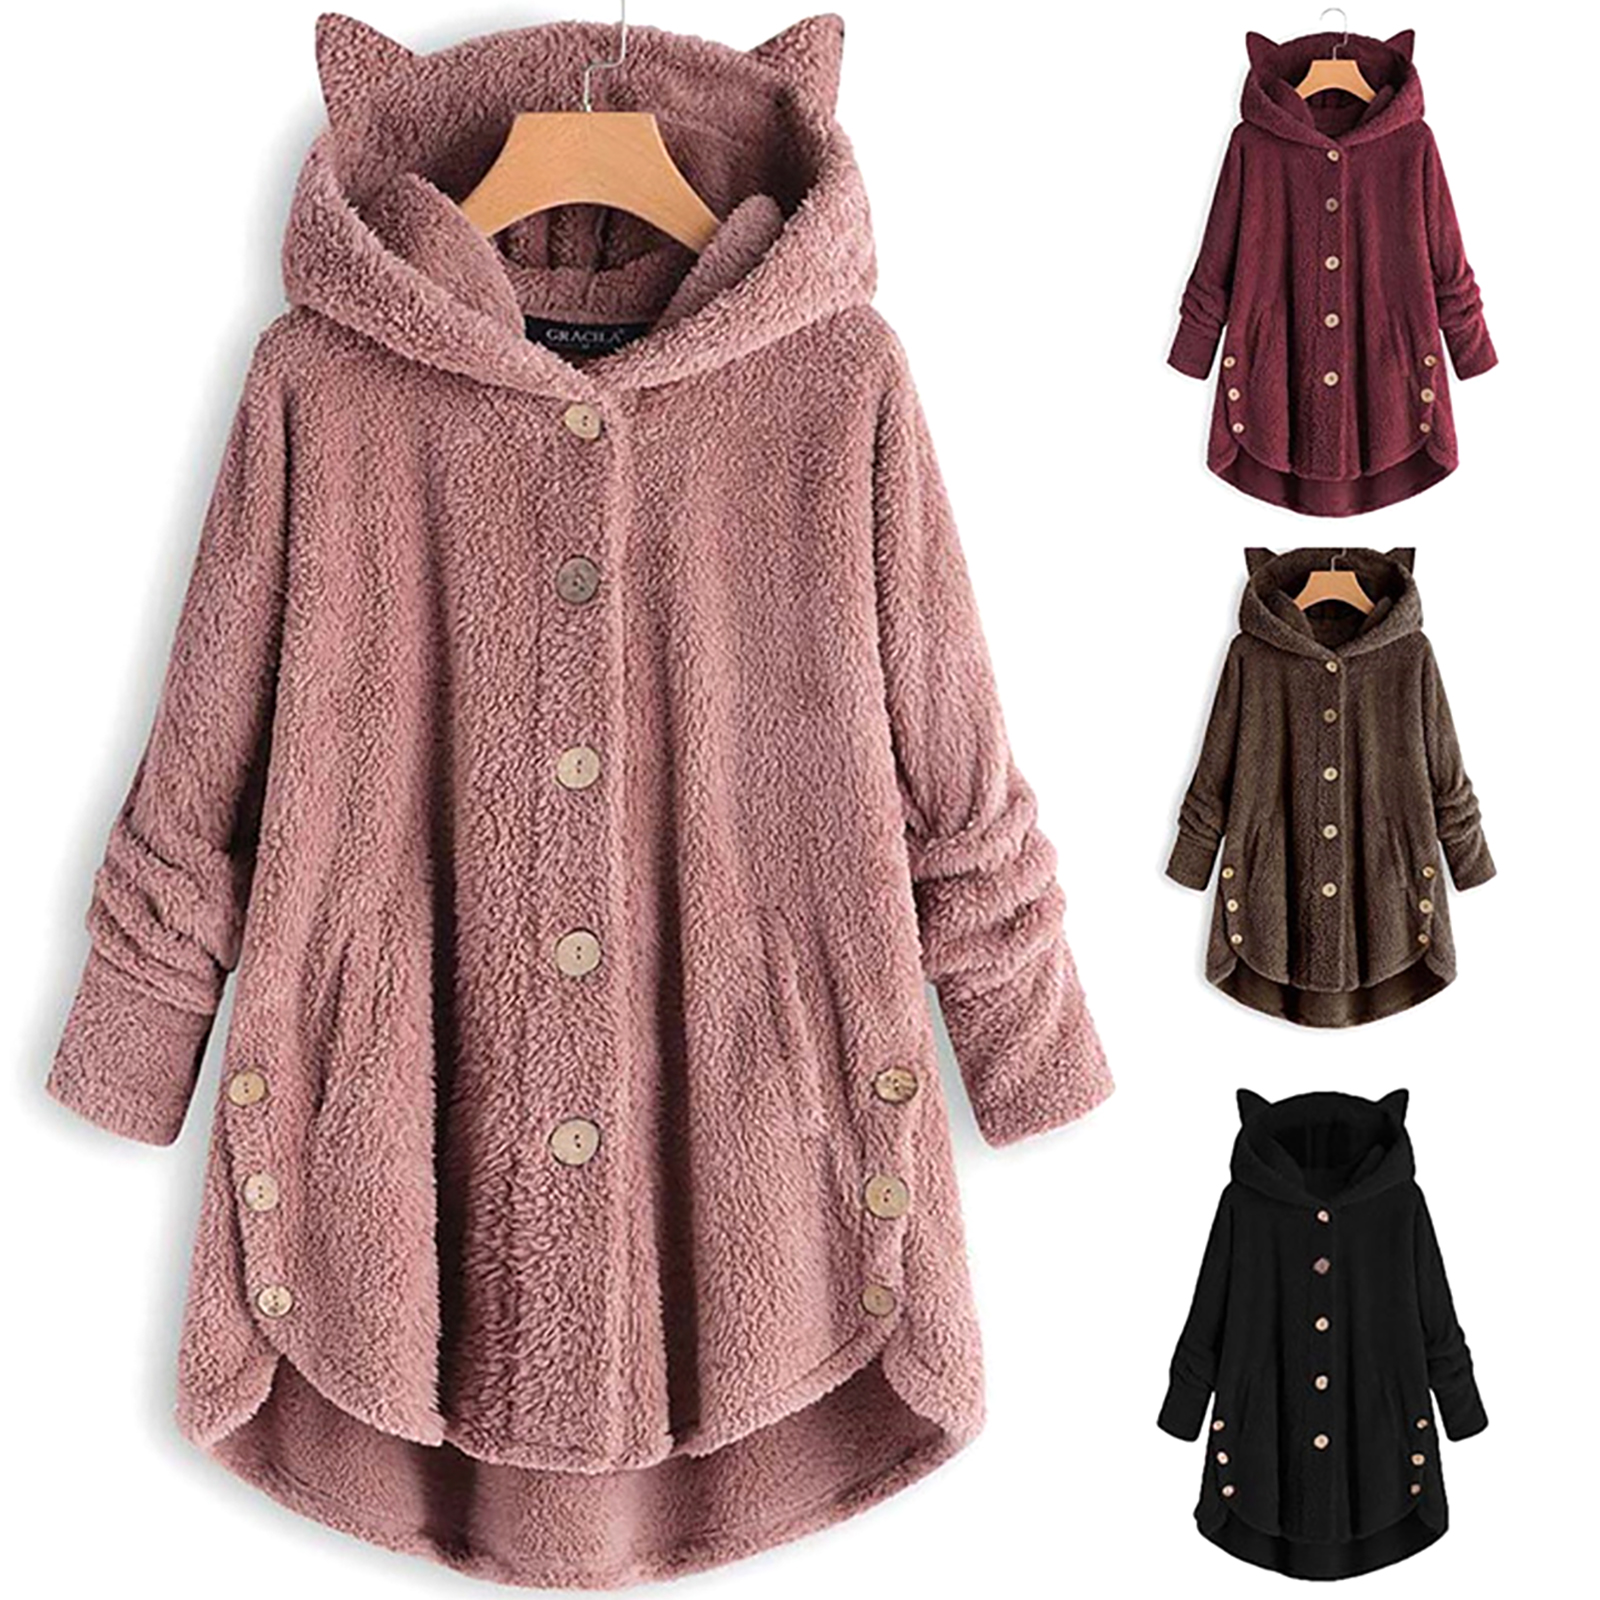 Female Faux Fur Coat Winter Warm Shearling Shaggy Jackets Button Tops for Women with Pockets - image 3 of 3